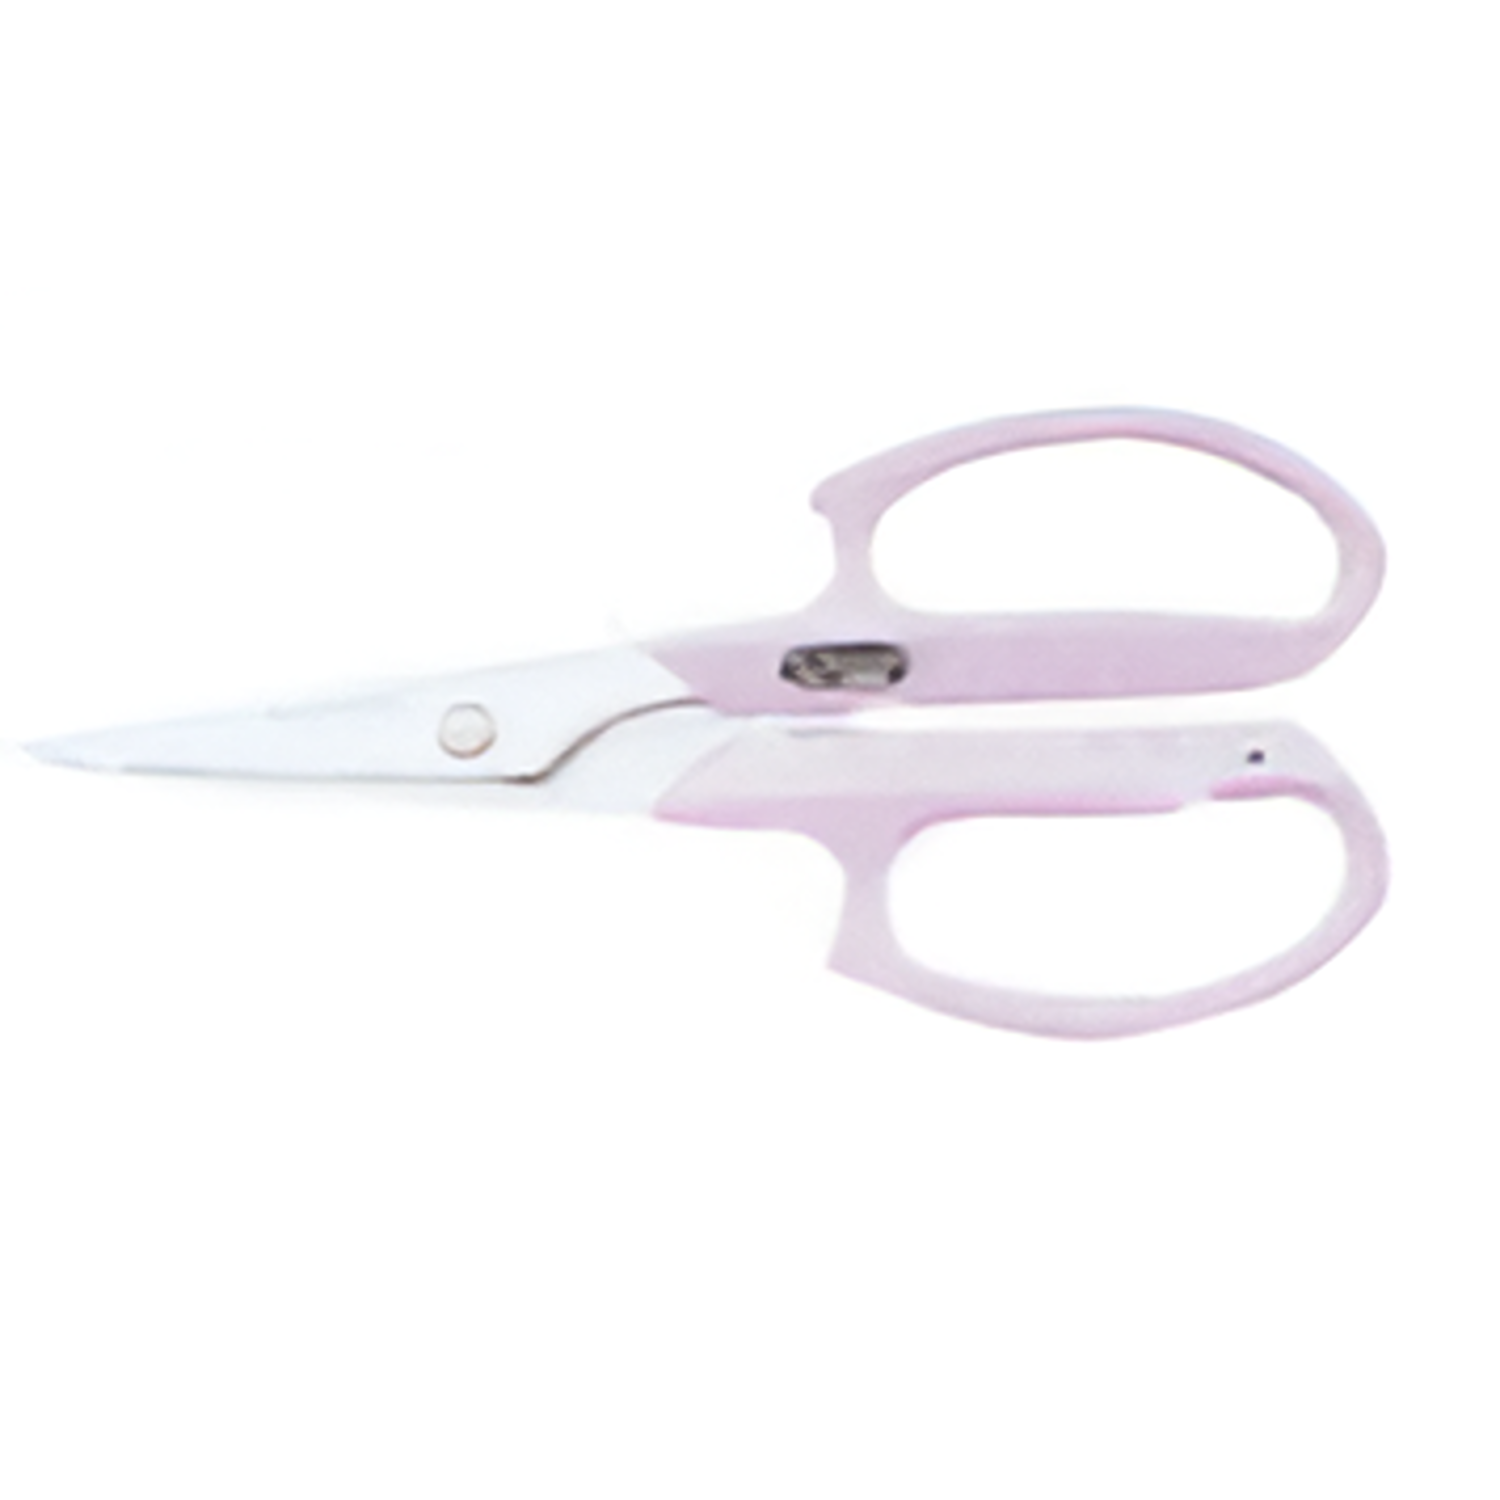 YEW AIK Pruning Shear- 1281 7” Hard Chrome-plated for Gardening - Premium Pruning Shear from YEW AIK - Shop now at Yew Aik.